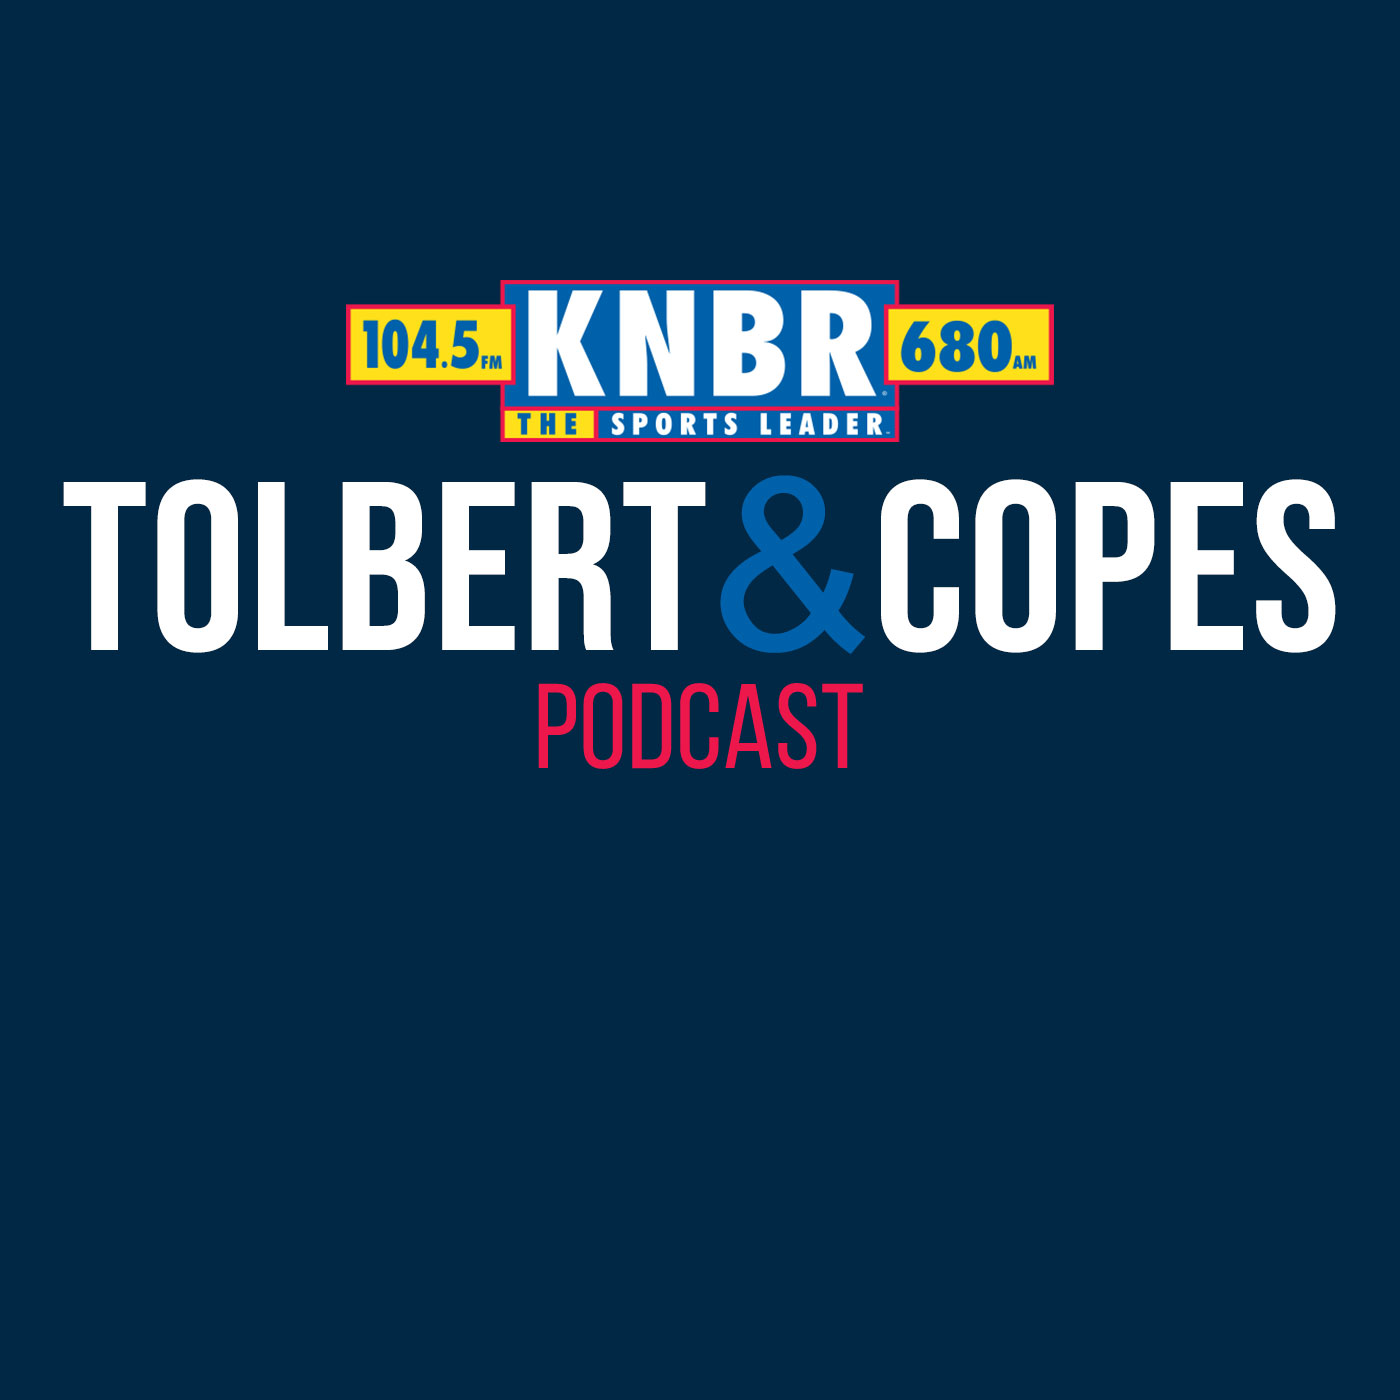 4-22 Andy Baggarly joins Tolbert & Kerry to discuss Blake Snell's struggles & Melvin's ejection